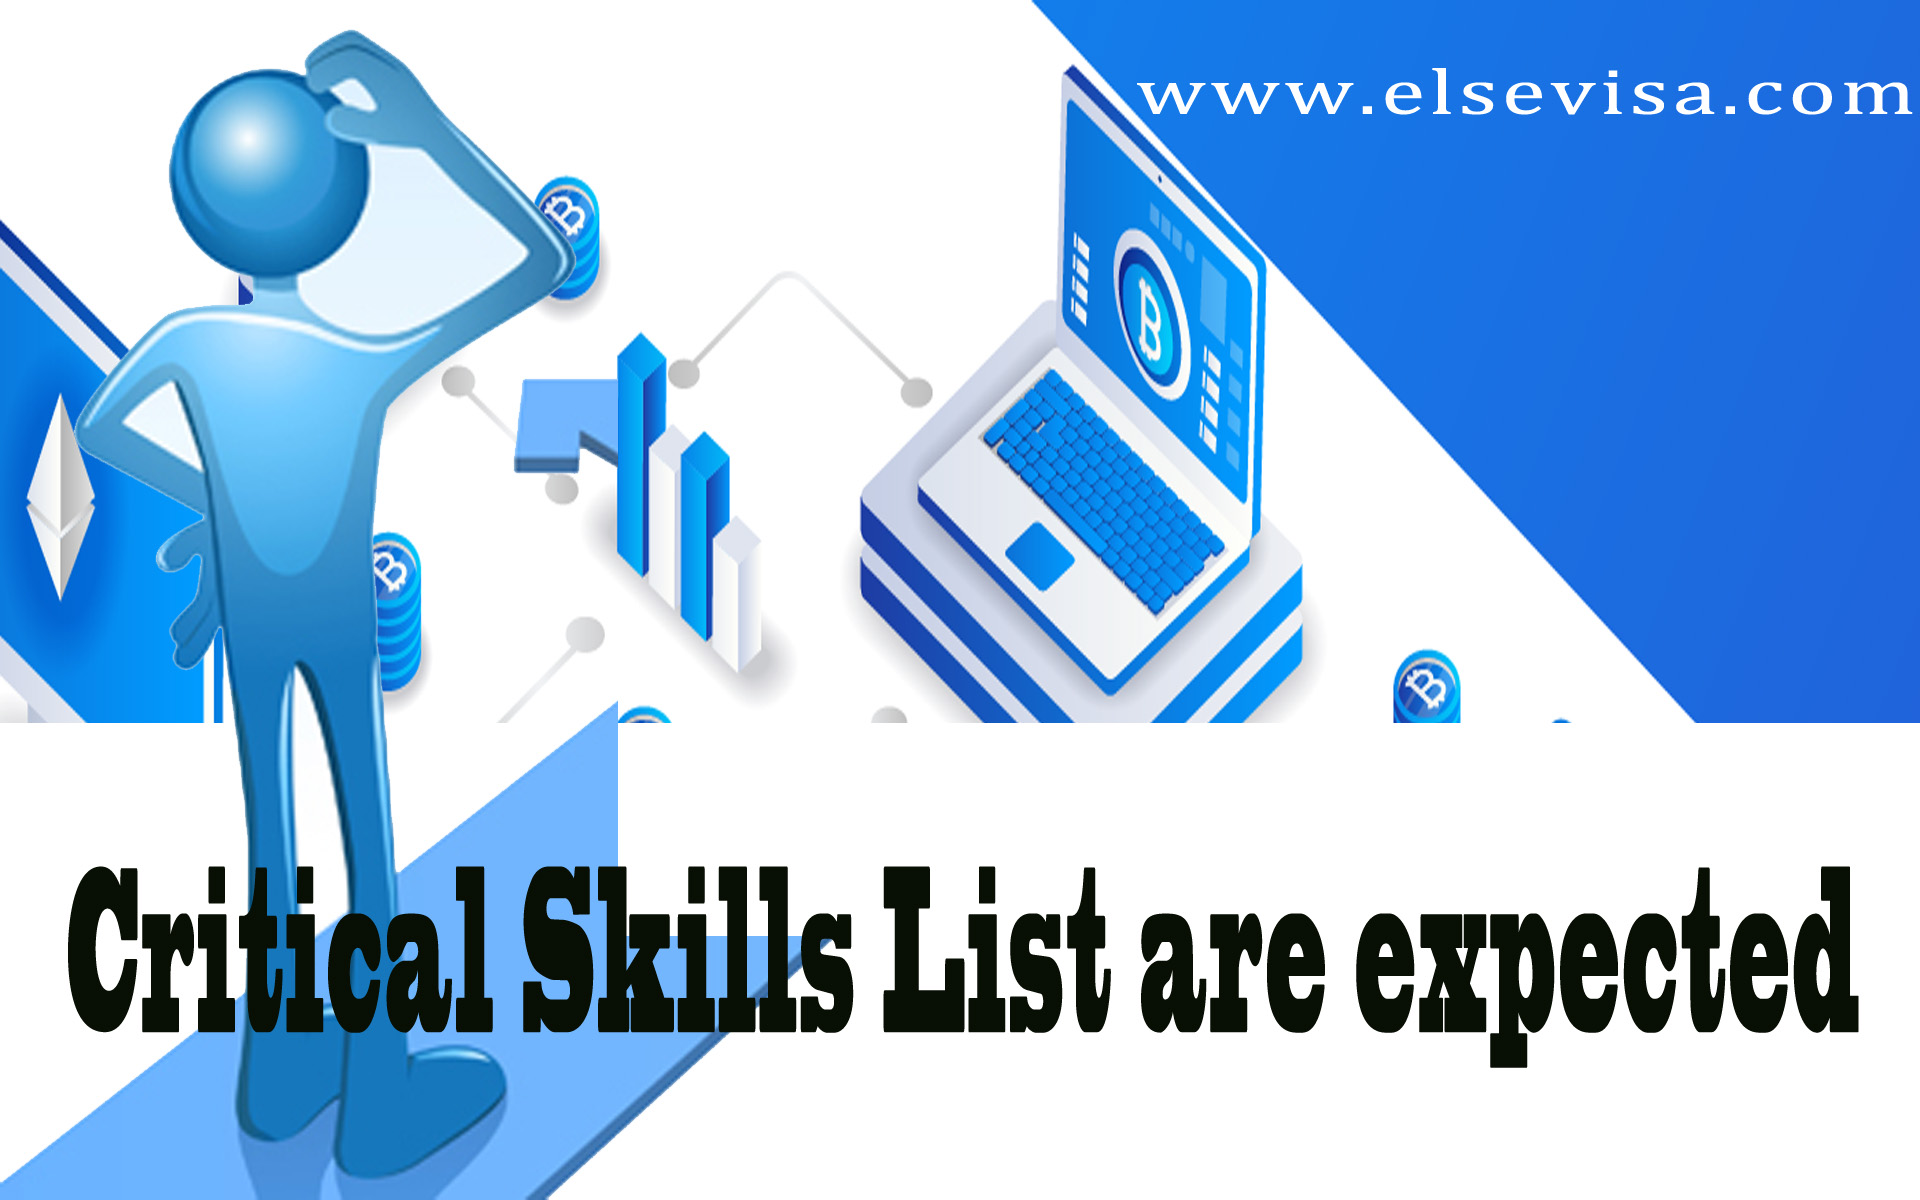 Critical Skills List are expected